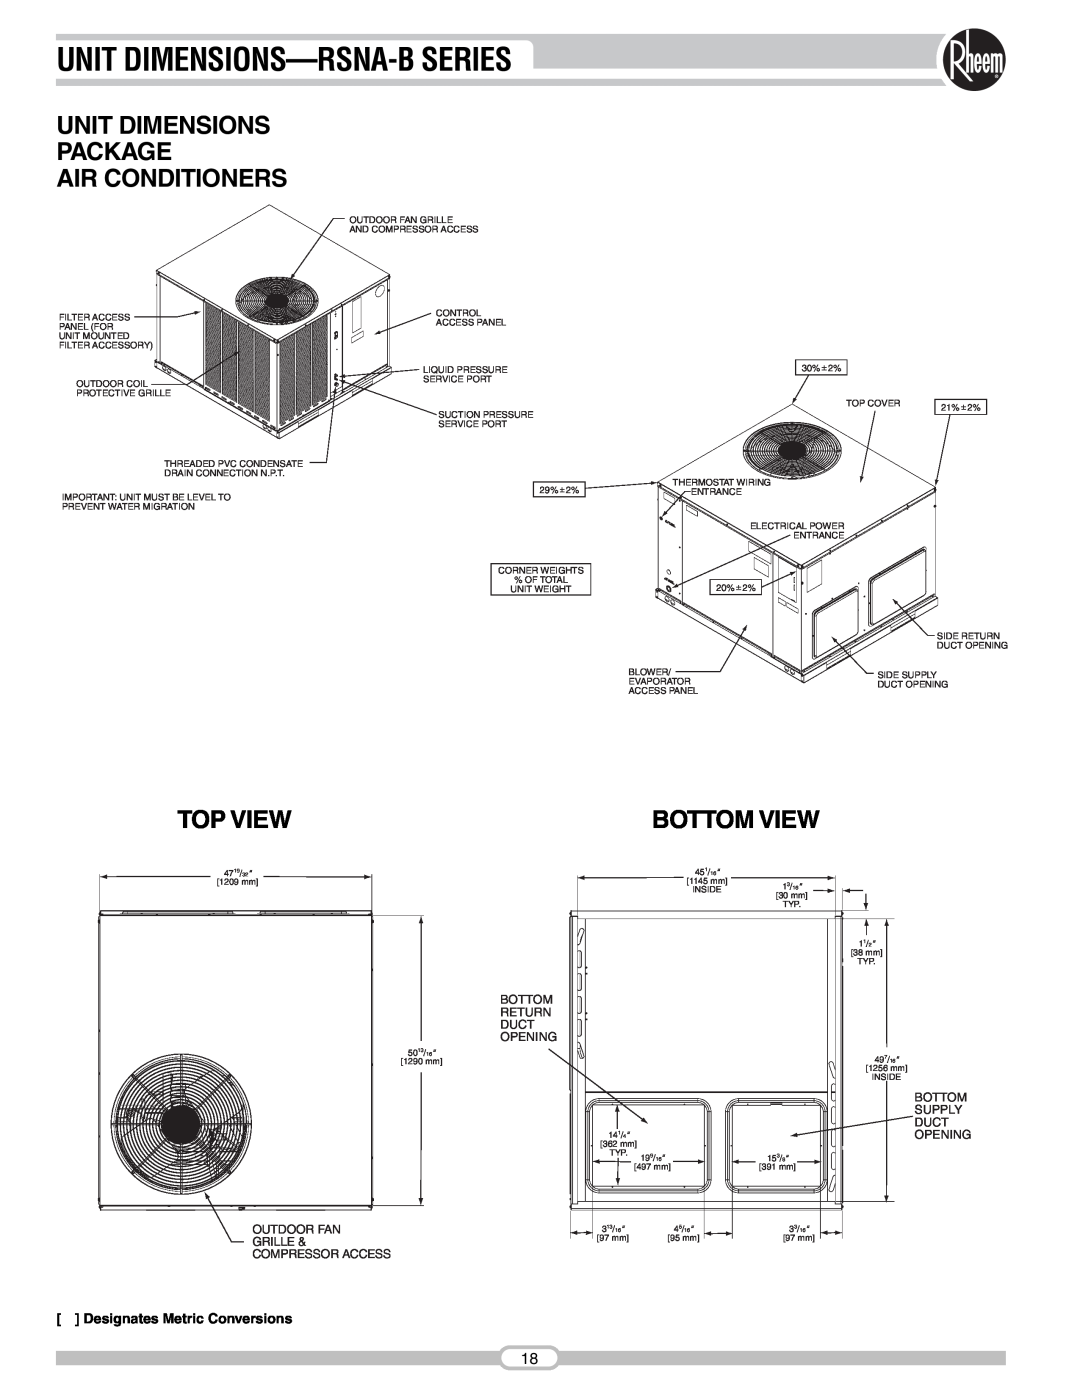 Rheem RSNA-B Series manual Unit Dimensions-Rsna-Bseries, Air Conditioners, Top View, Unit Dimensions Package, Bottom View 